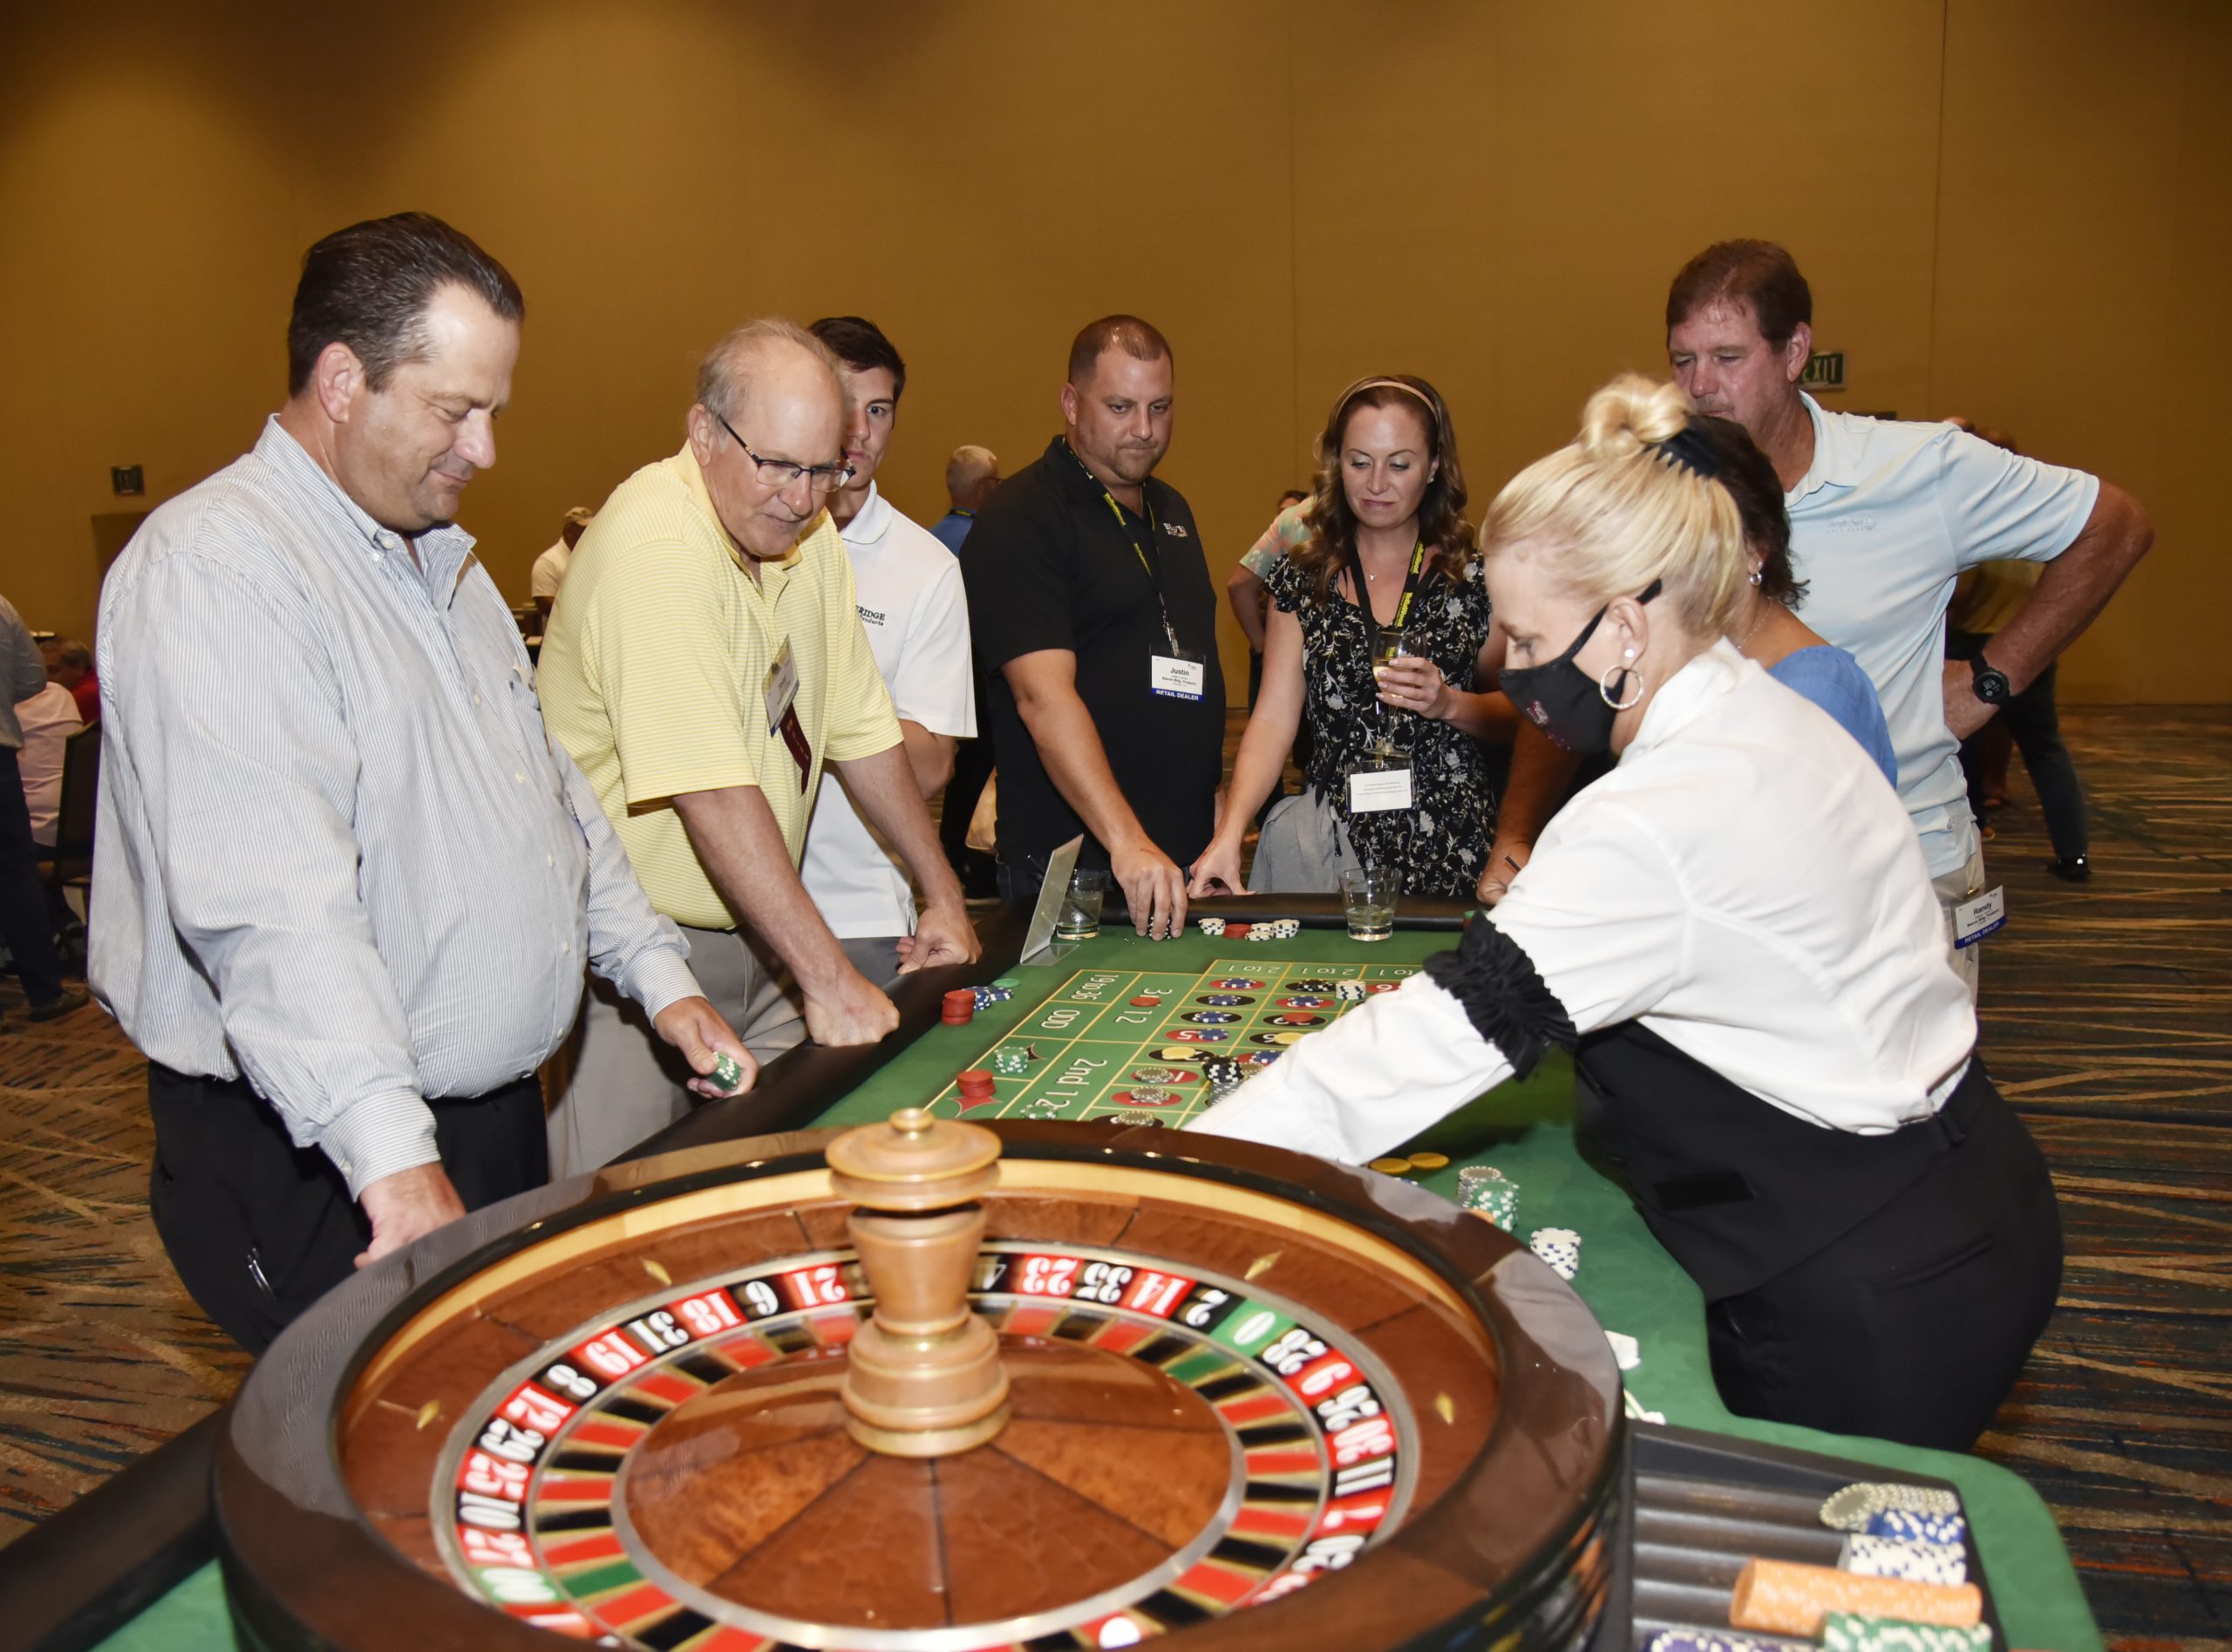 FBMA members gathering around a roulette table for Vegas Night.